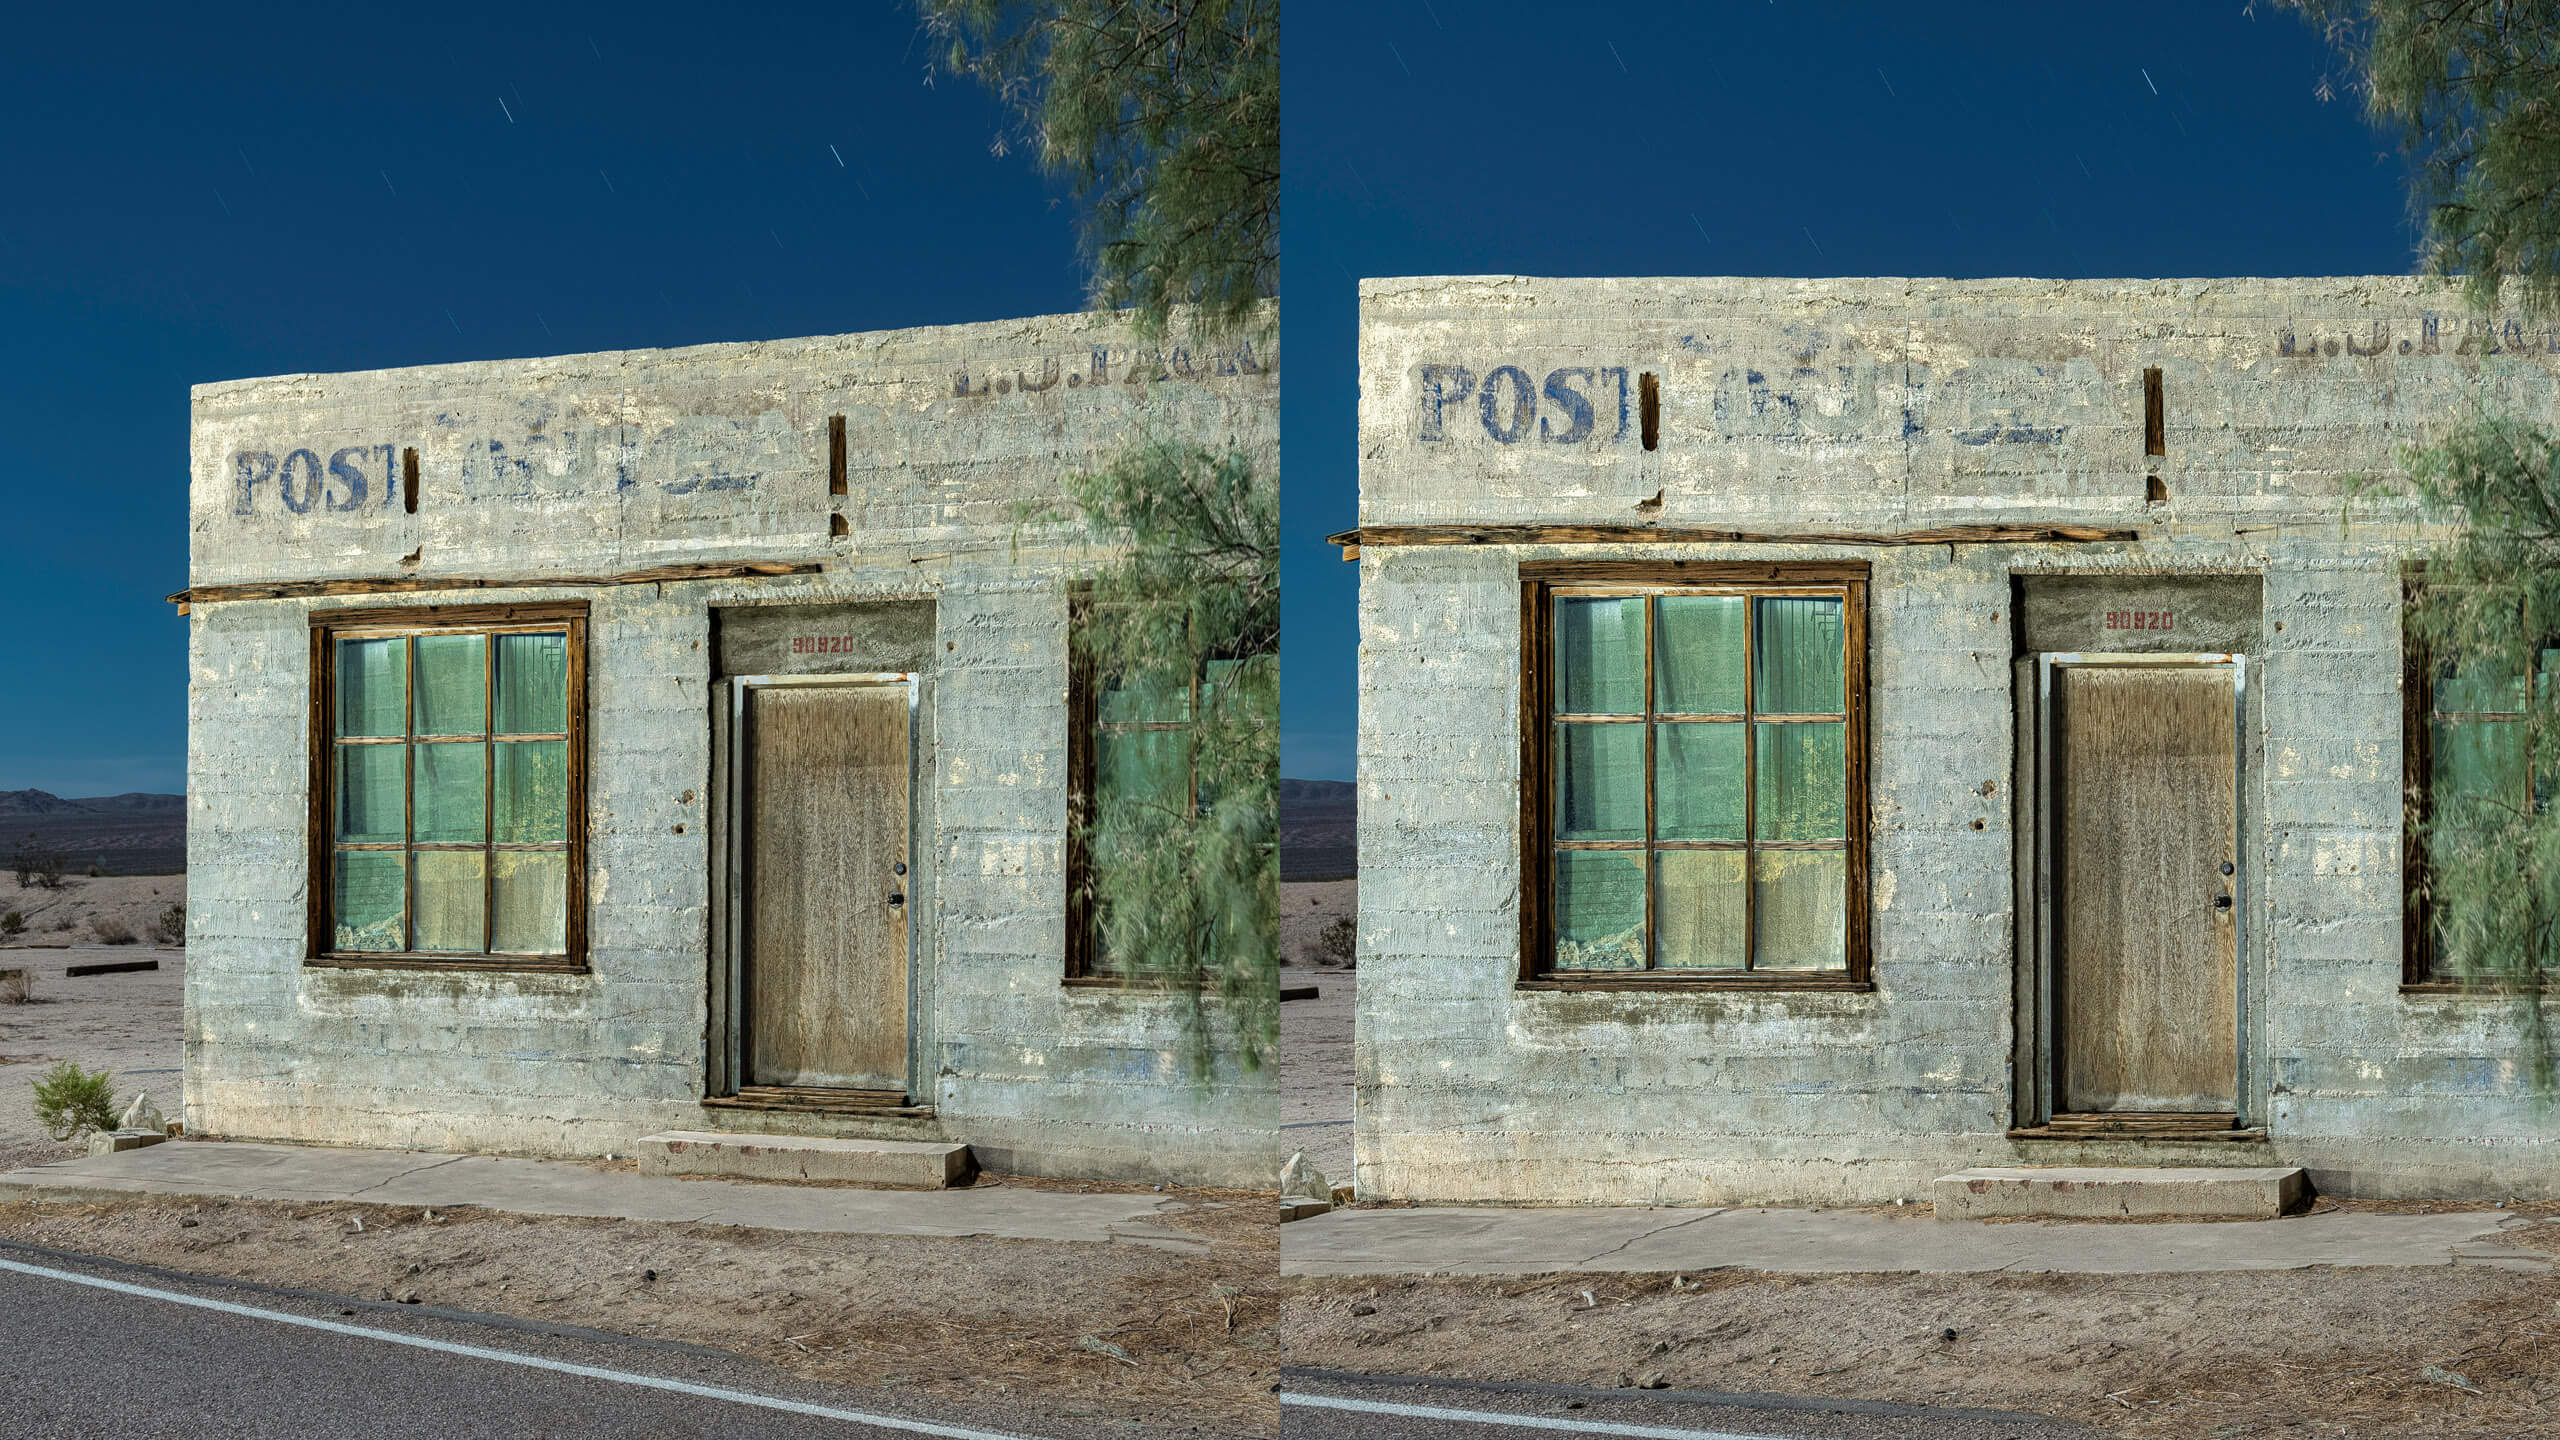 5632_kenlee_california-Nelson-notorious-RGB_211020_0146_3mf8iso200_Pentax_mojave-national-preserve-kelso-depot-post-office-farther2-COMPARISON-BEFORE-AND-AFTER-KELSO-DEPOT-photofocus-HEADER